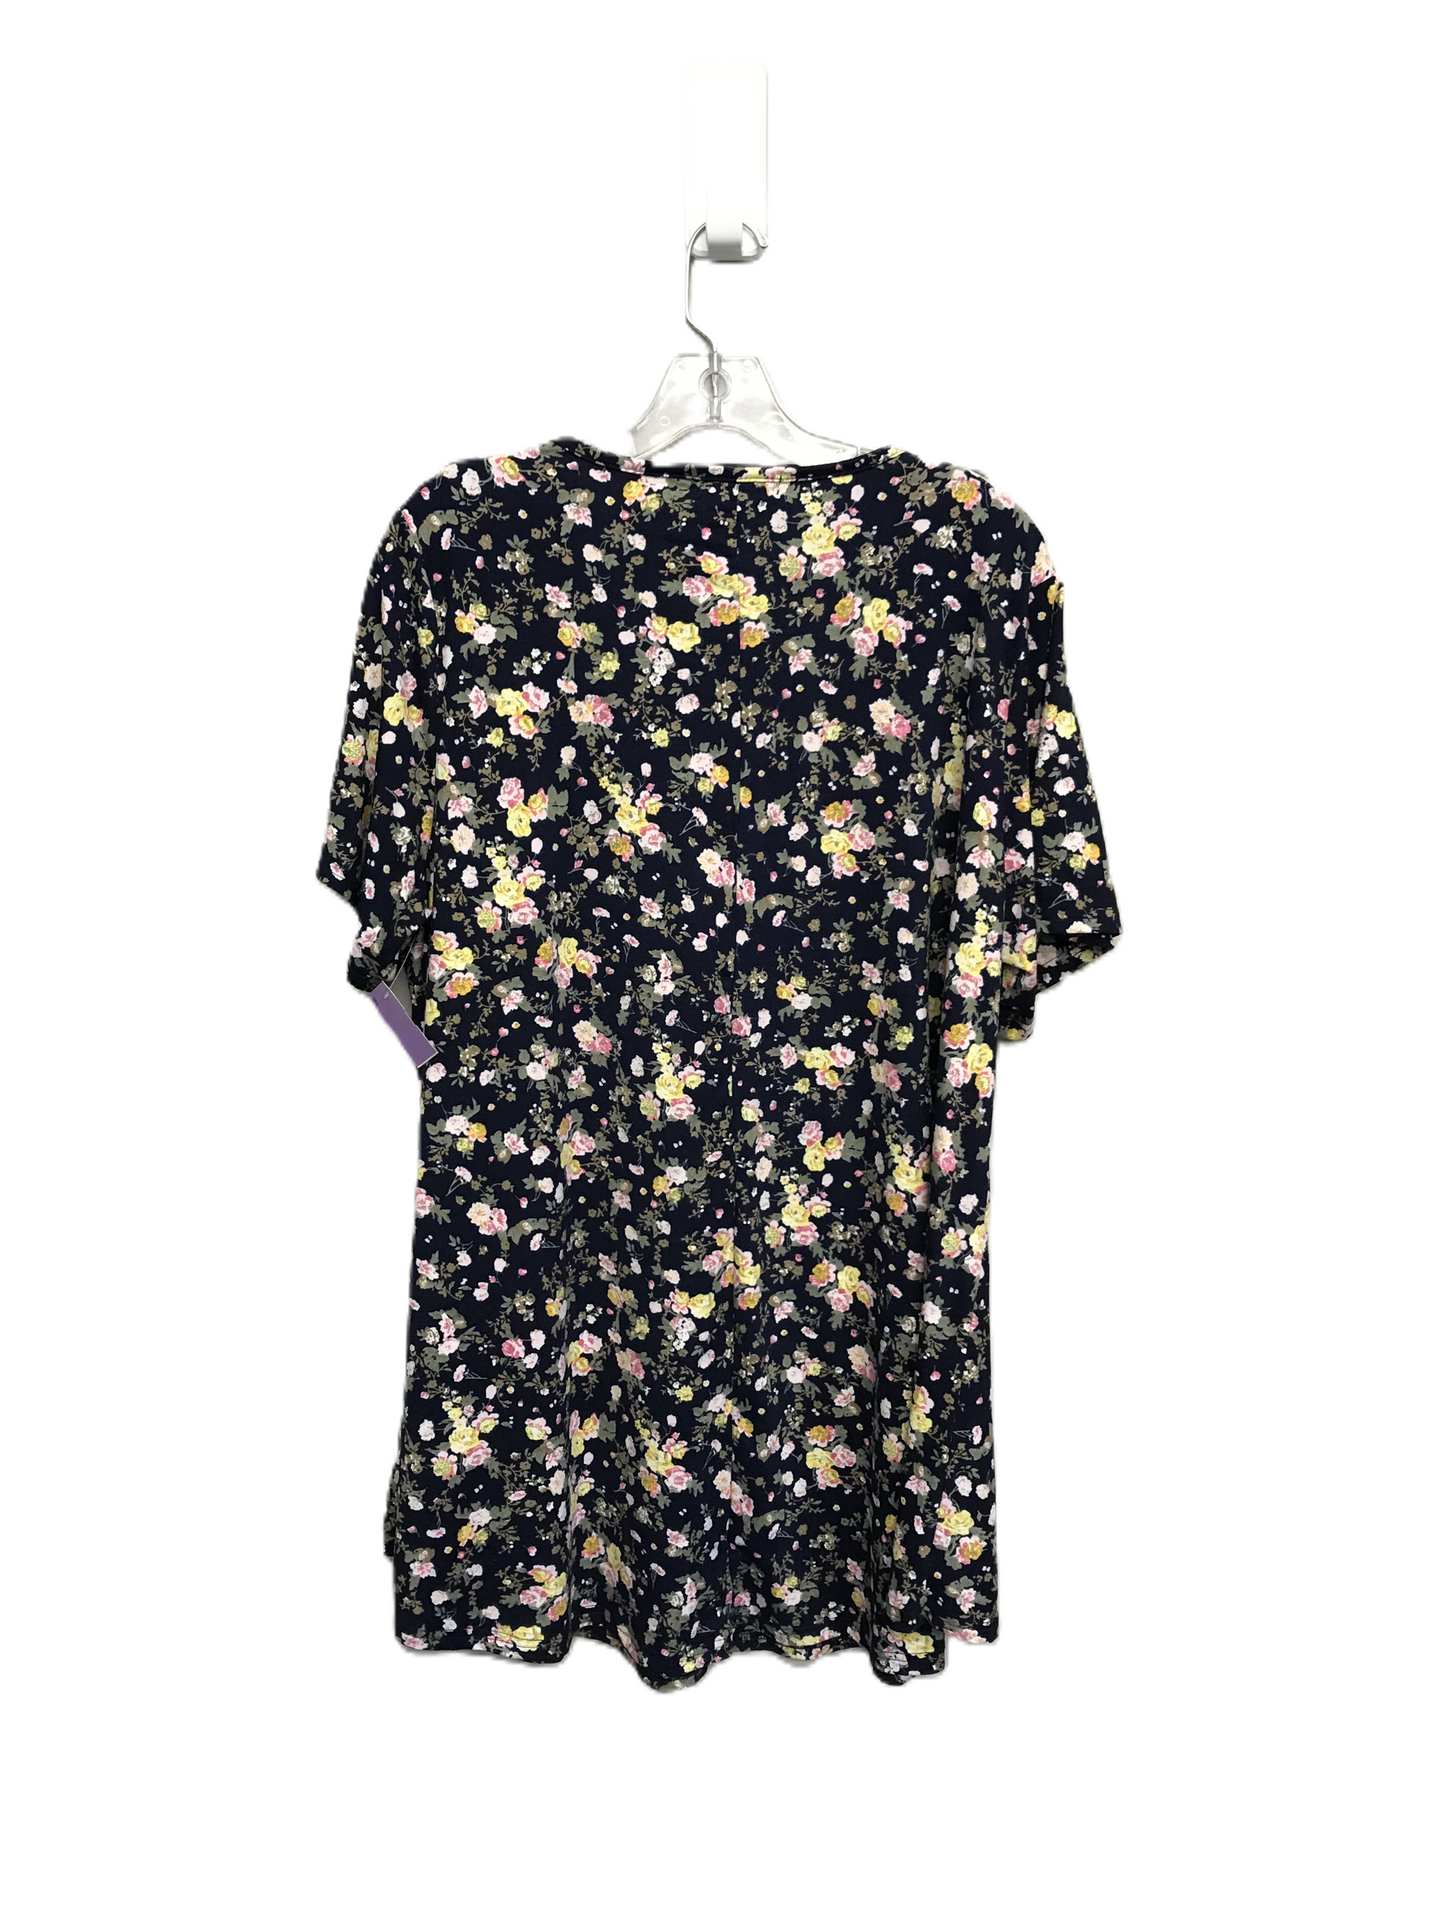 Floral Print Top Short Sleeve By Monnuro Size: 3x